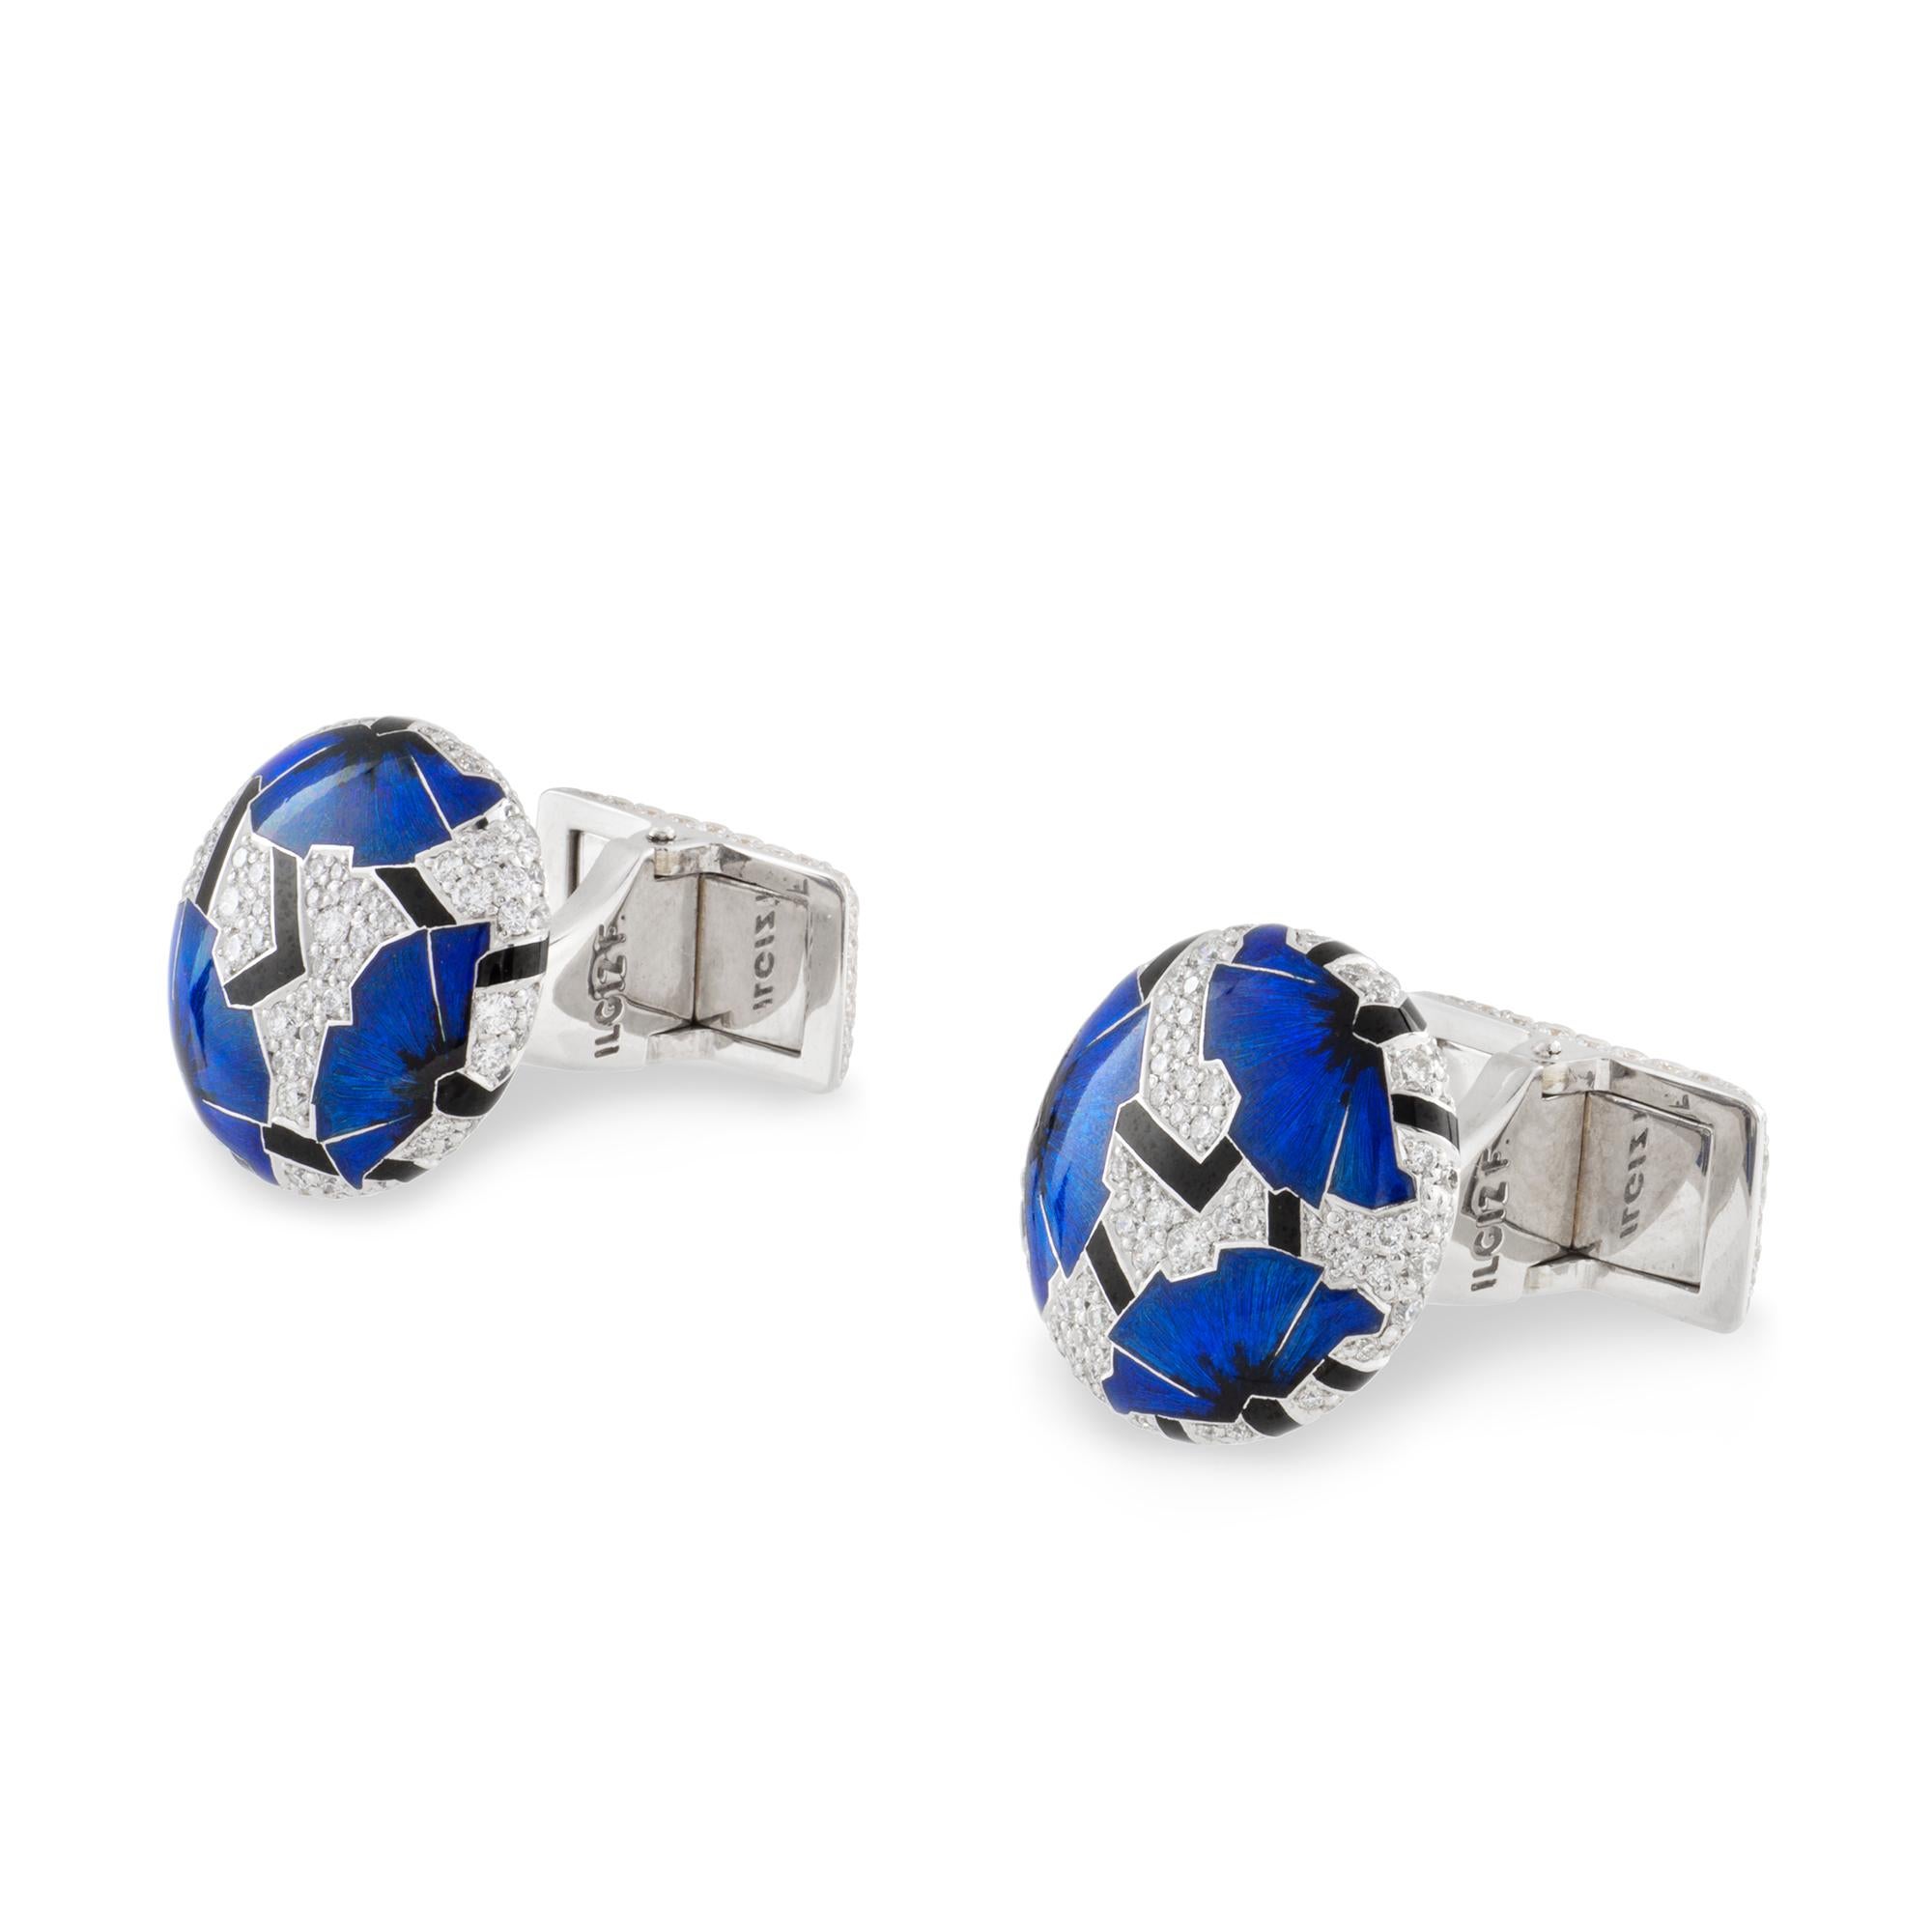 A pair of blue poppies cufflinks by Ilgiz F, each cufflink with three poppies with champlevé enamelled petals and hot enamelled peduncles, on a diamond pave-set background of round shape, all mounted in 18ct gold with diamond-set swivel fittings